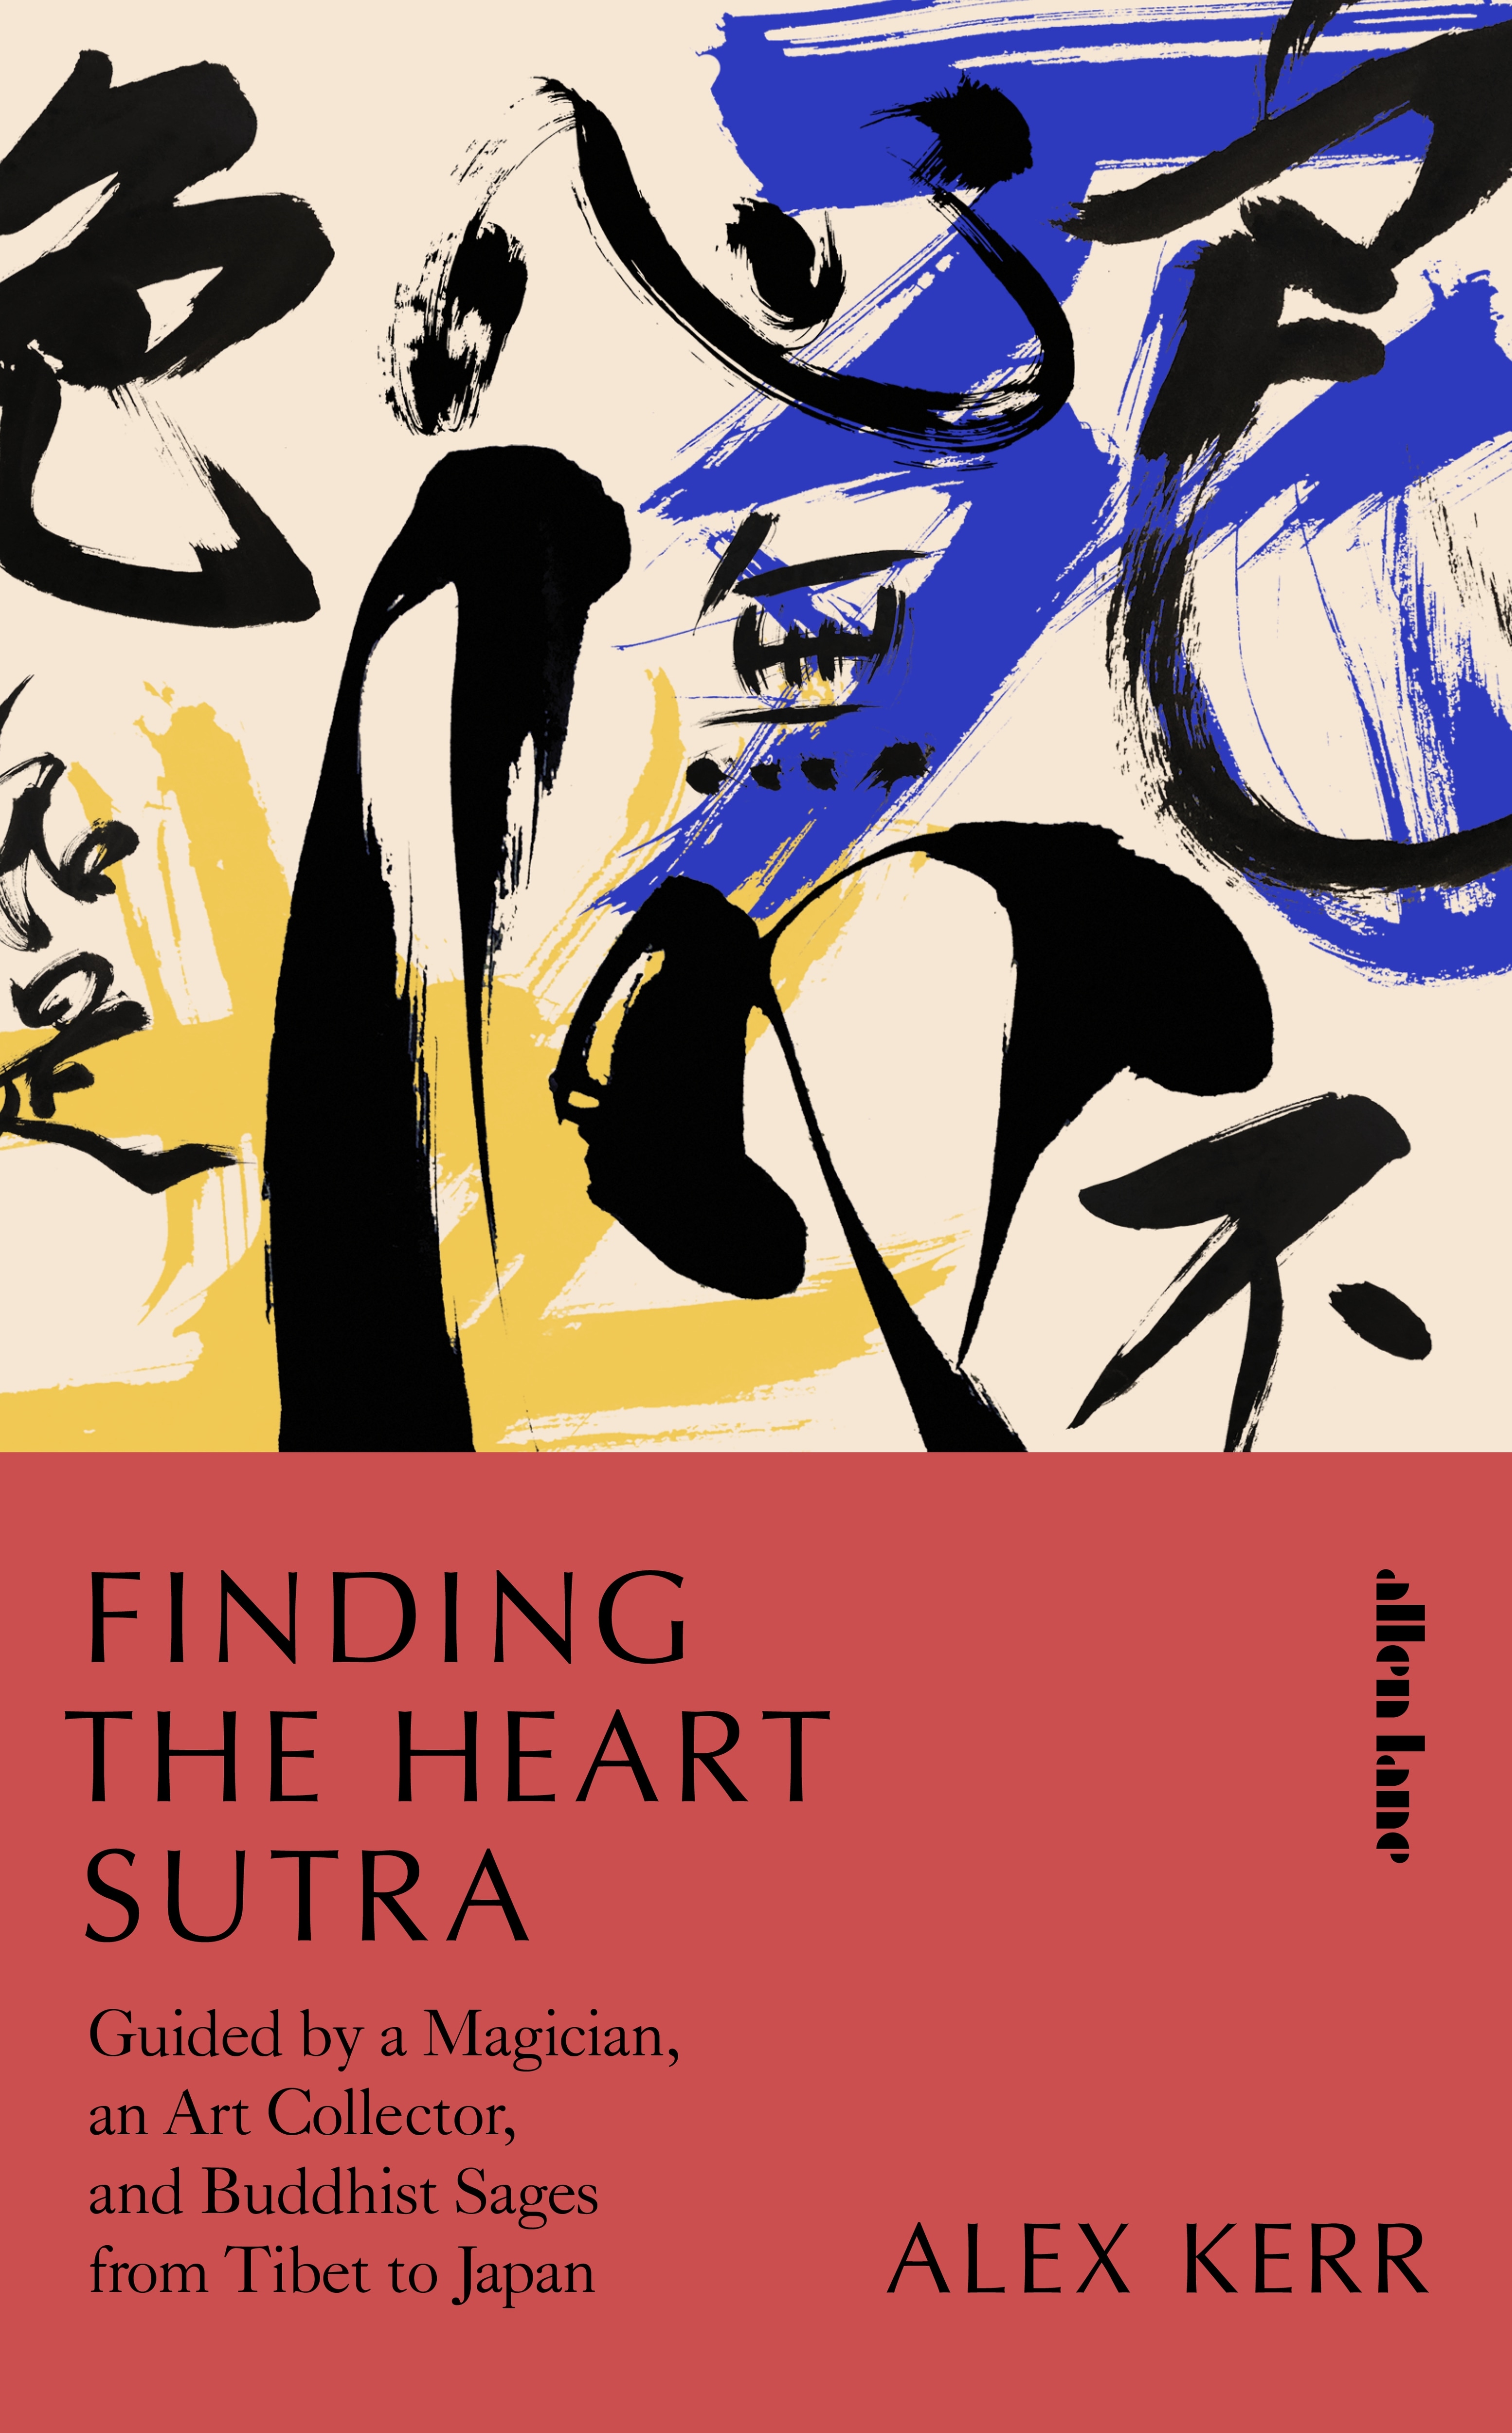 Book “Finding the Heart Sutra” by Alex Kerr — November 26, 2020